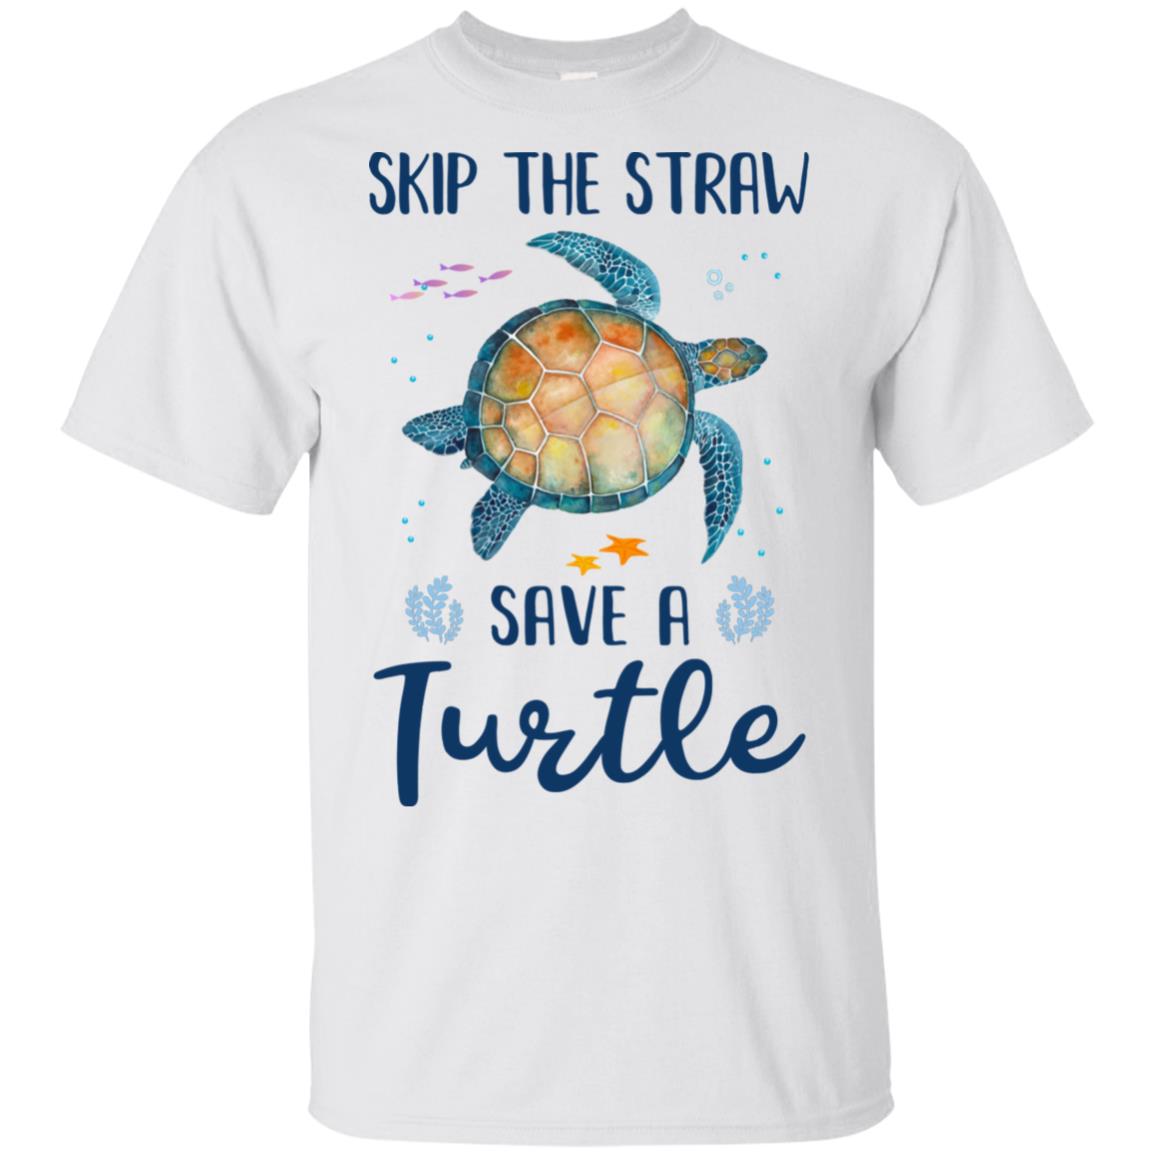 If you've ever heard the phrase skip the straw and save a turtle